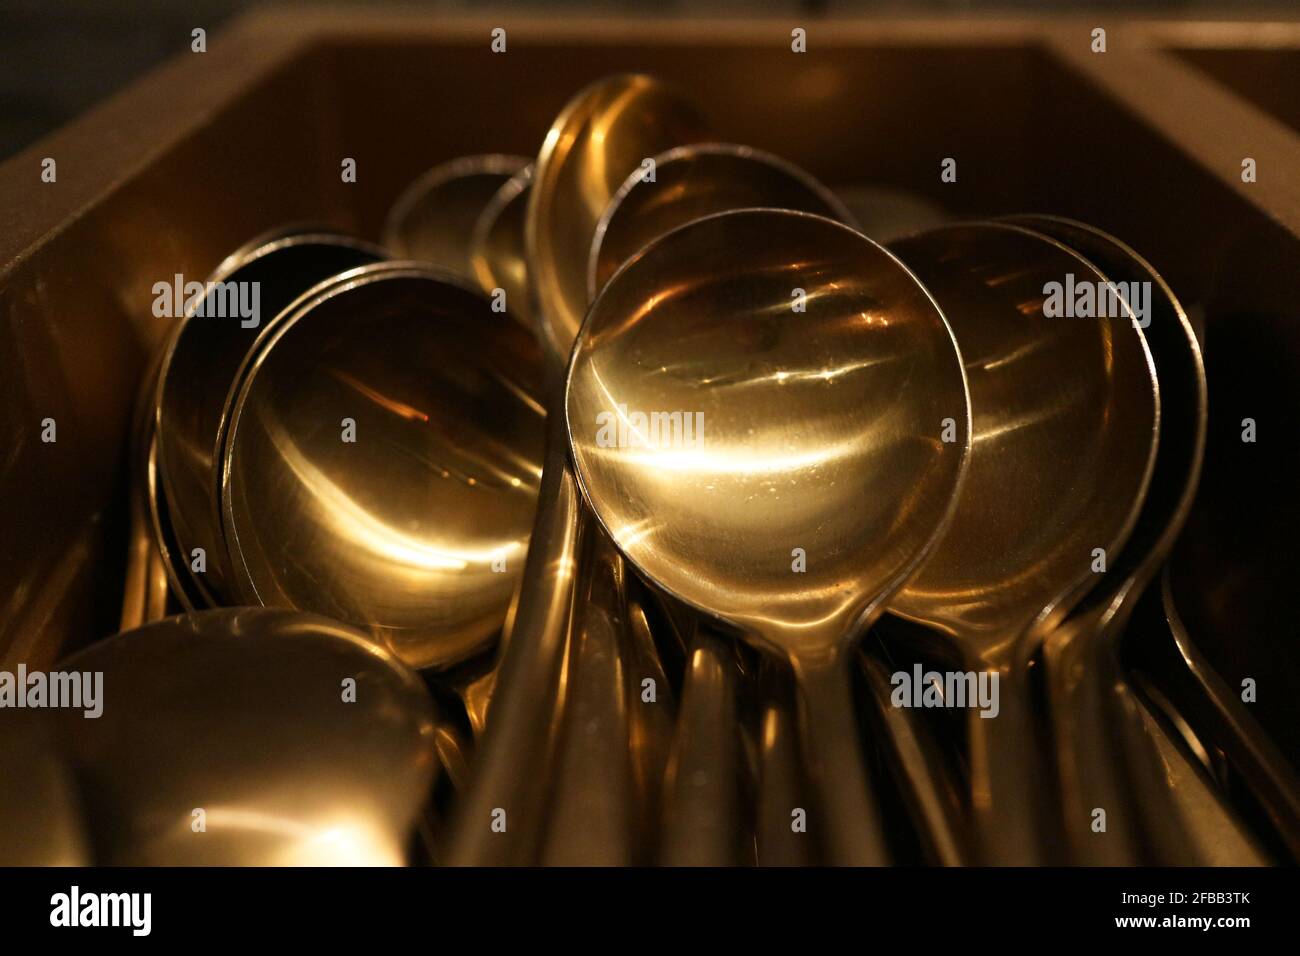 Shiny brass spoons in a pile Stock Photo